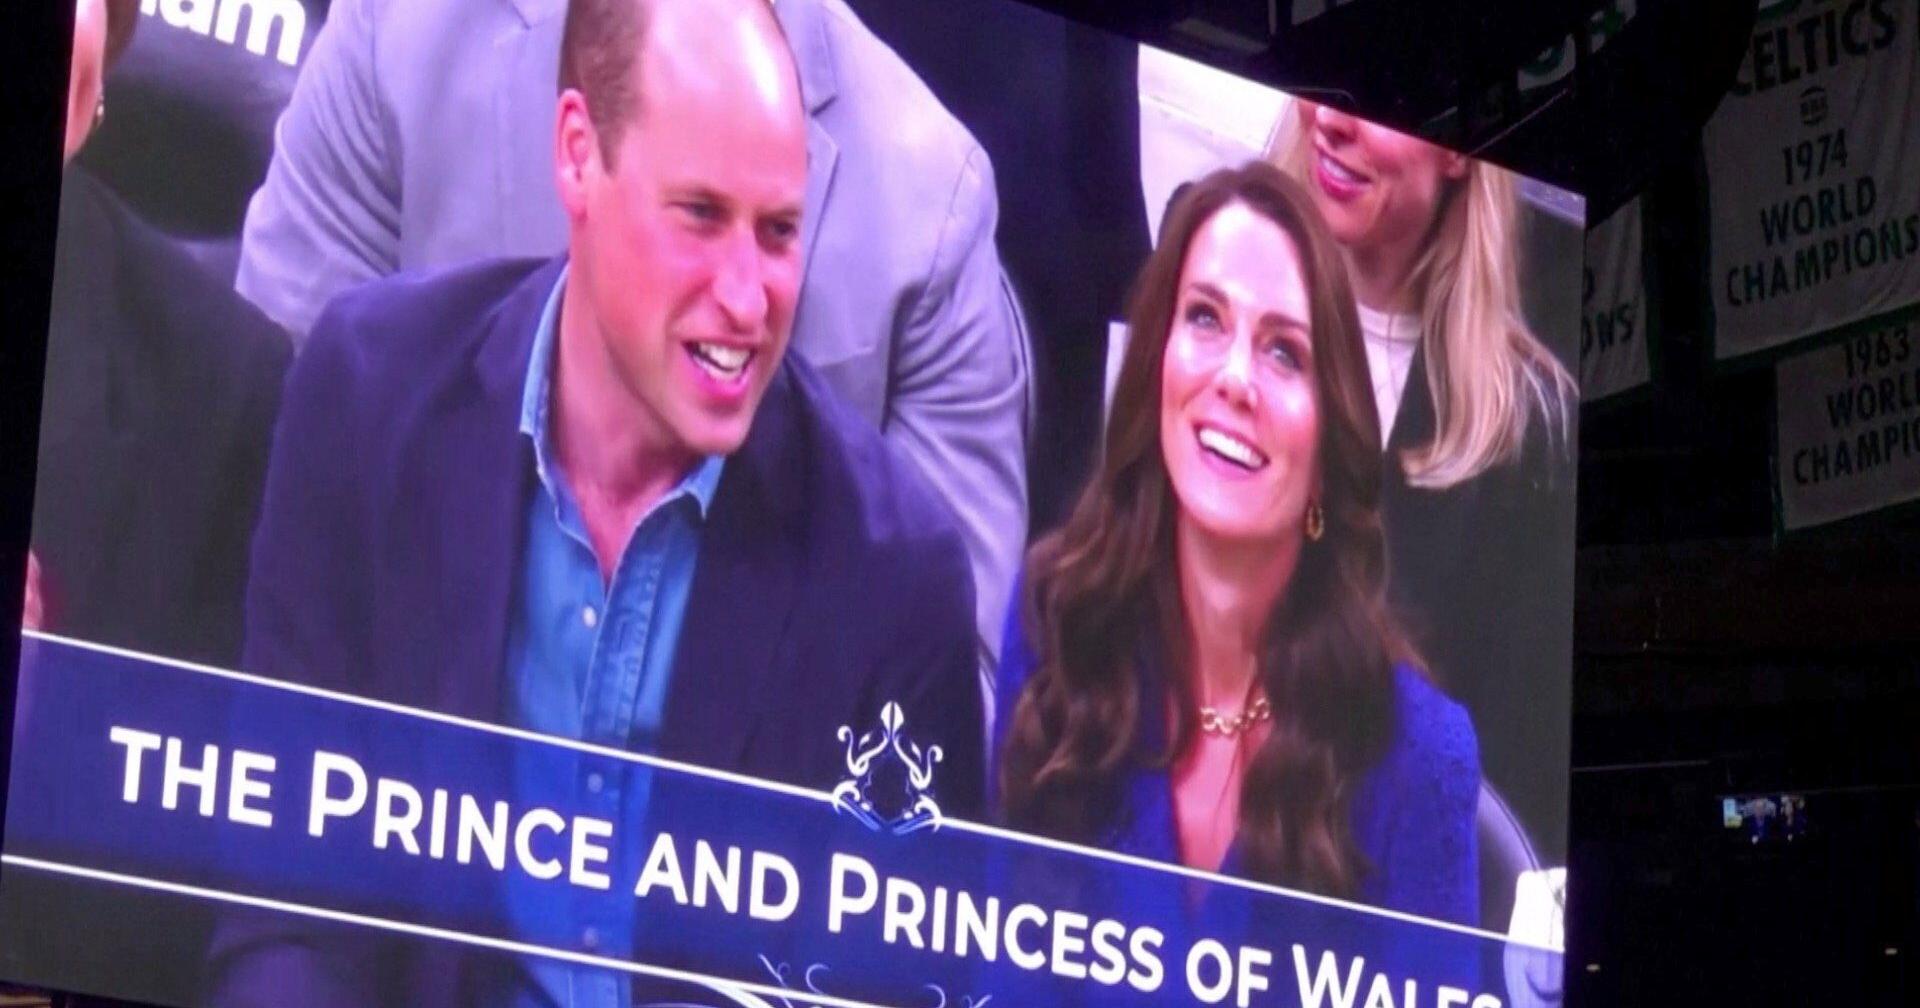 Crowd chants ‘USA, USA’ as Prince William and Kate attend Boston Celtics game